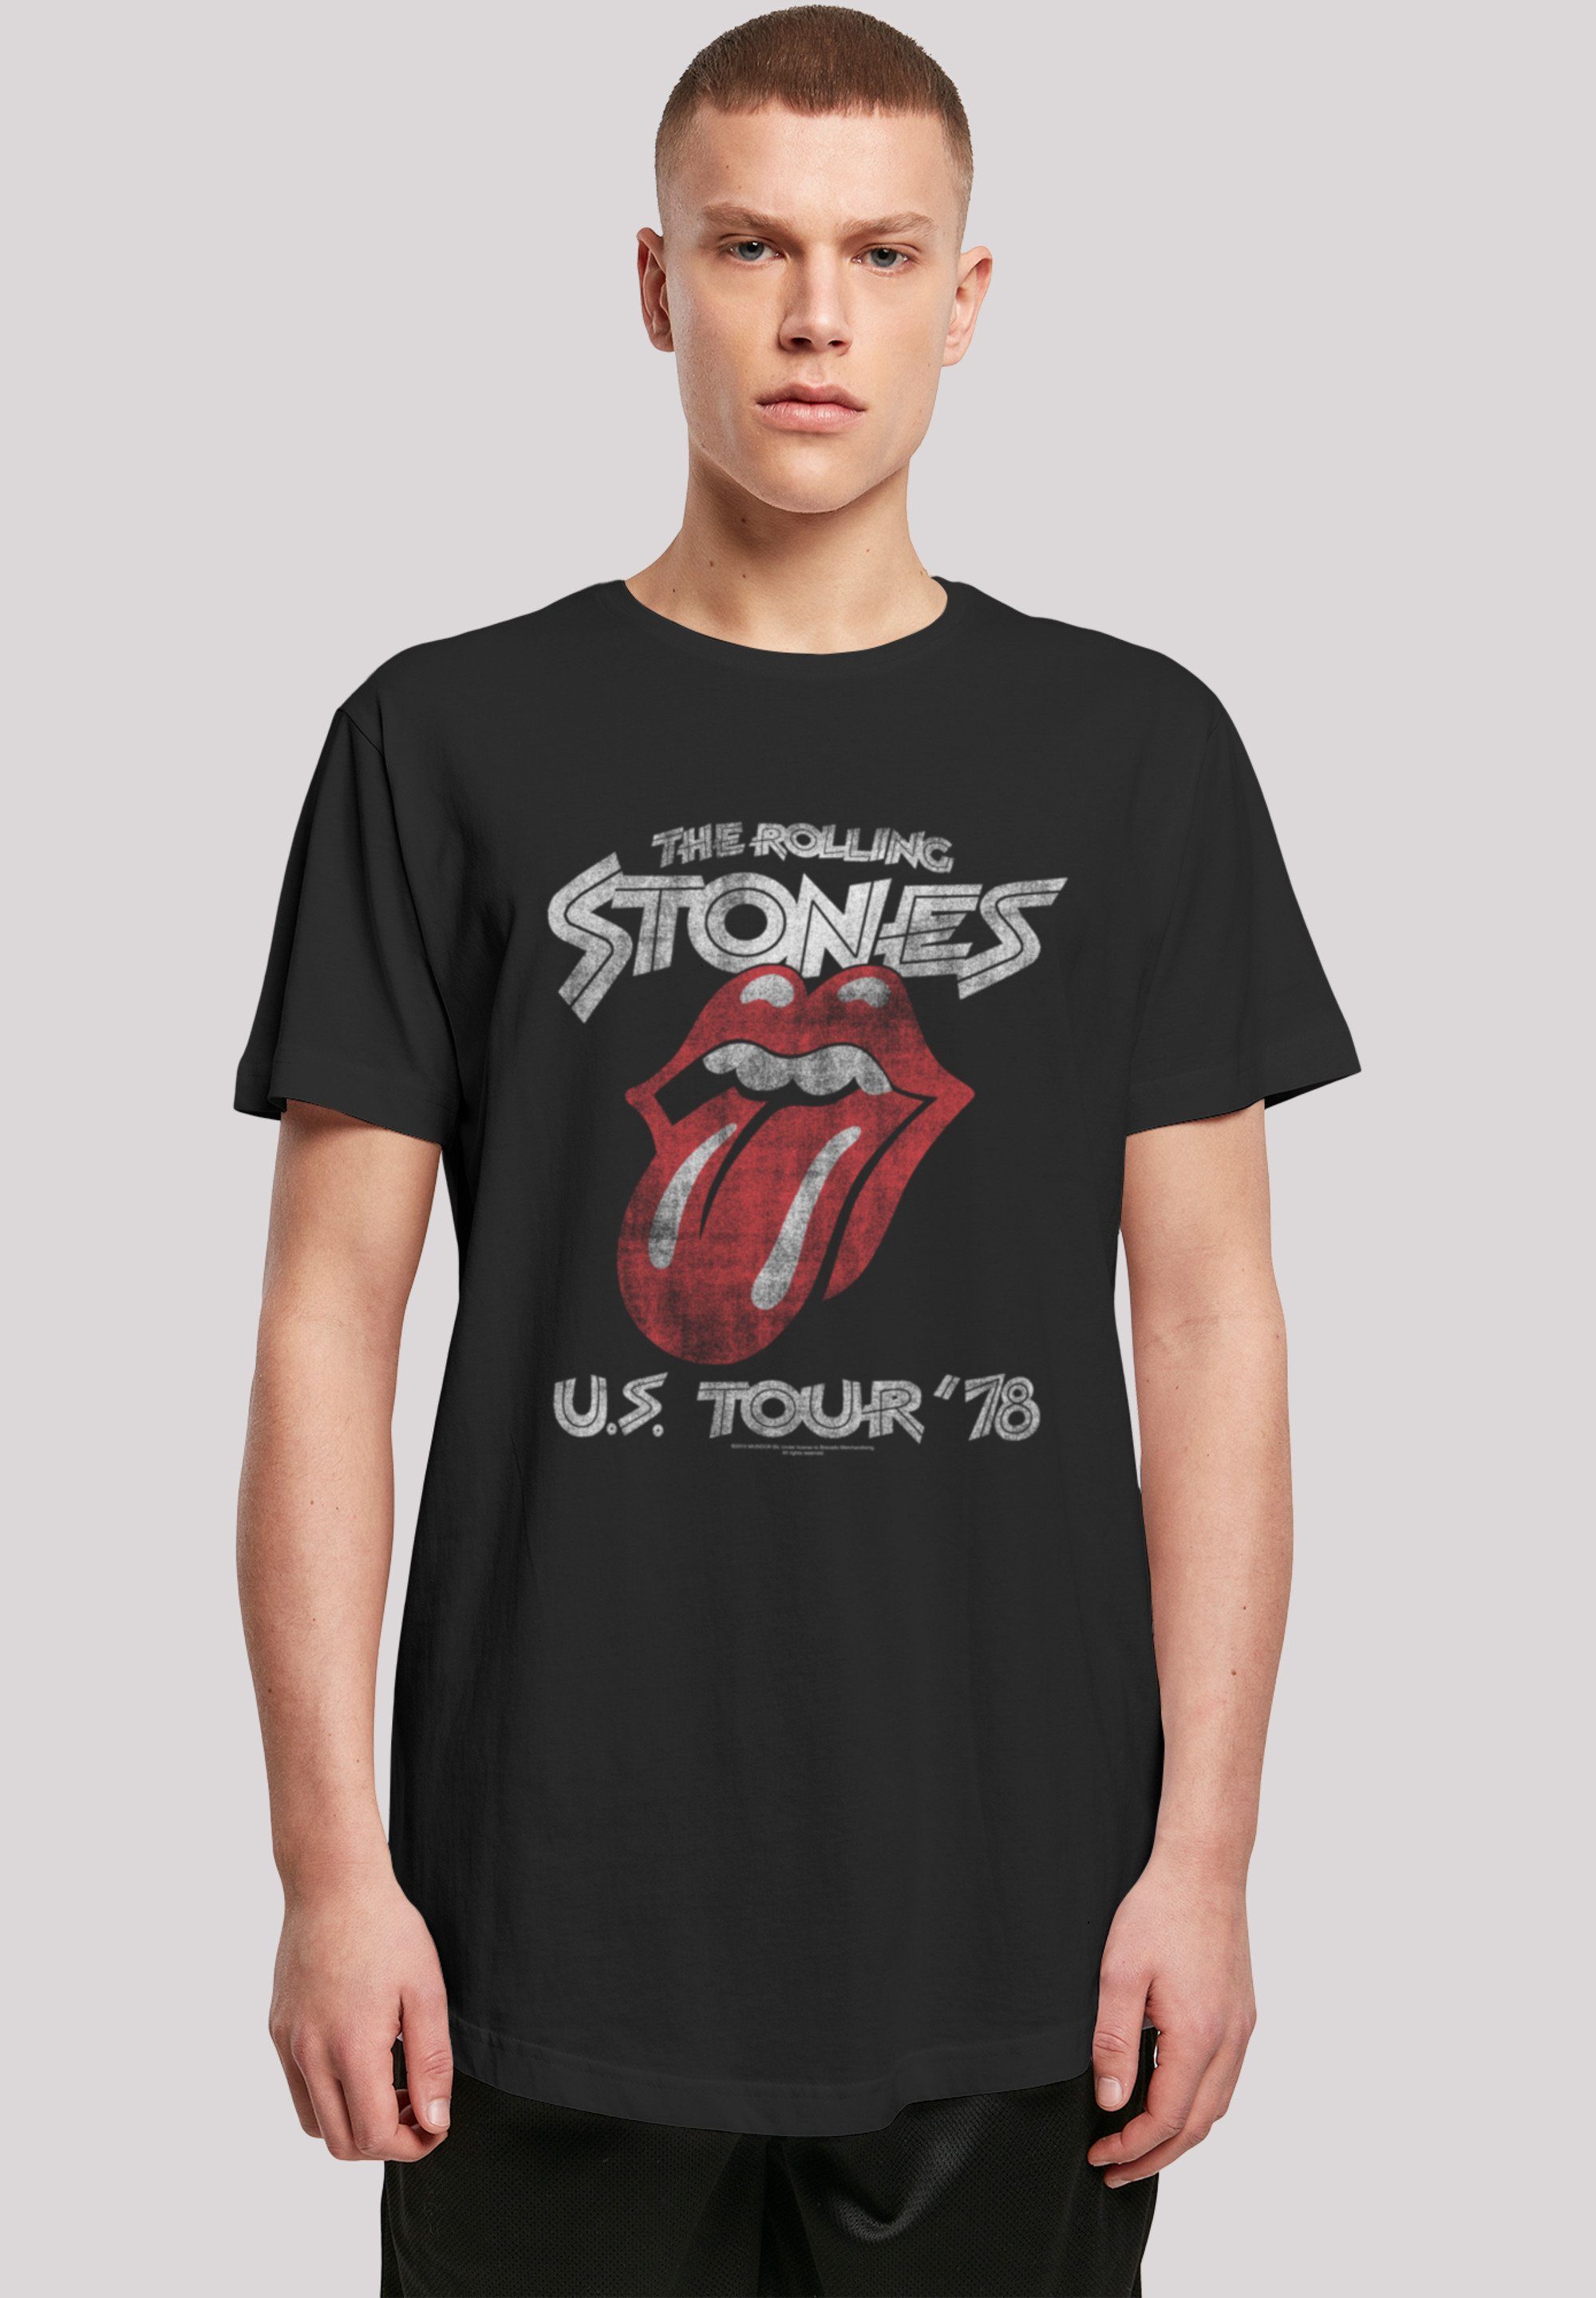 F4NT4STIC T-Shirt The Rolling Stones Rock Band US Tour '78 Front Print | T-Shirts